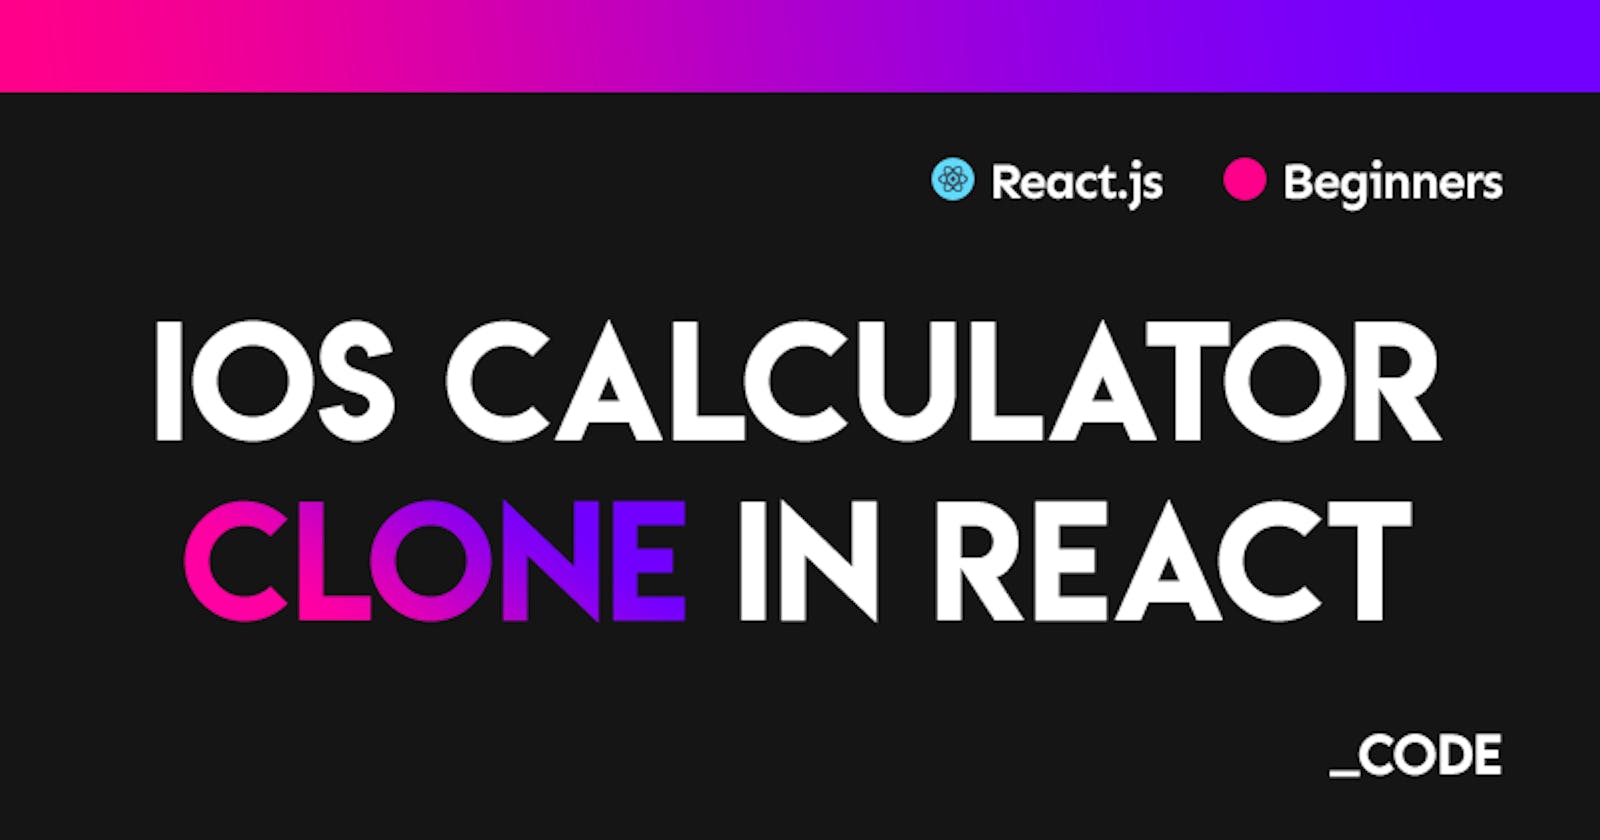 Let's create an iOS Calculator Clone in React [+ detailed explanations]